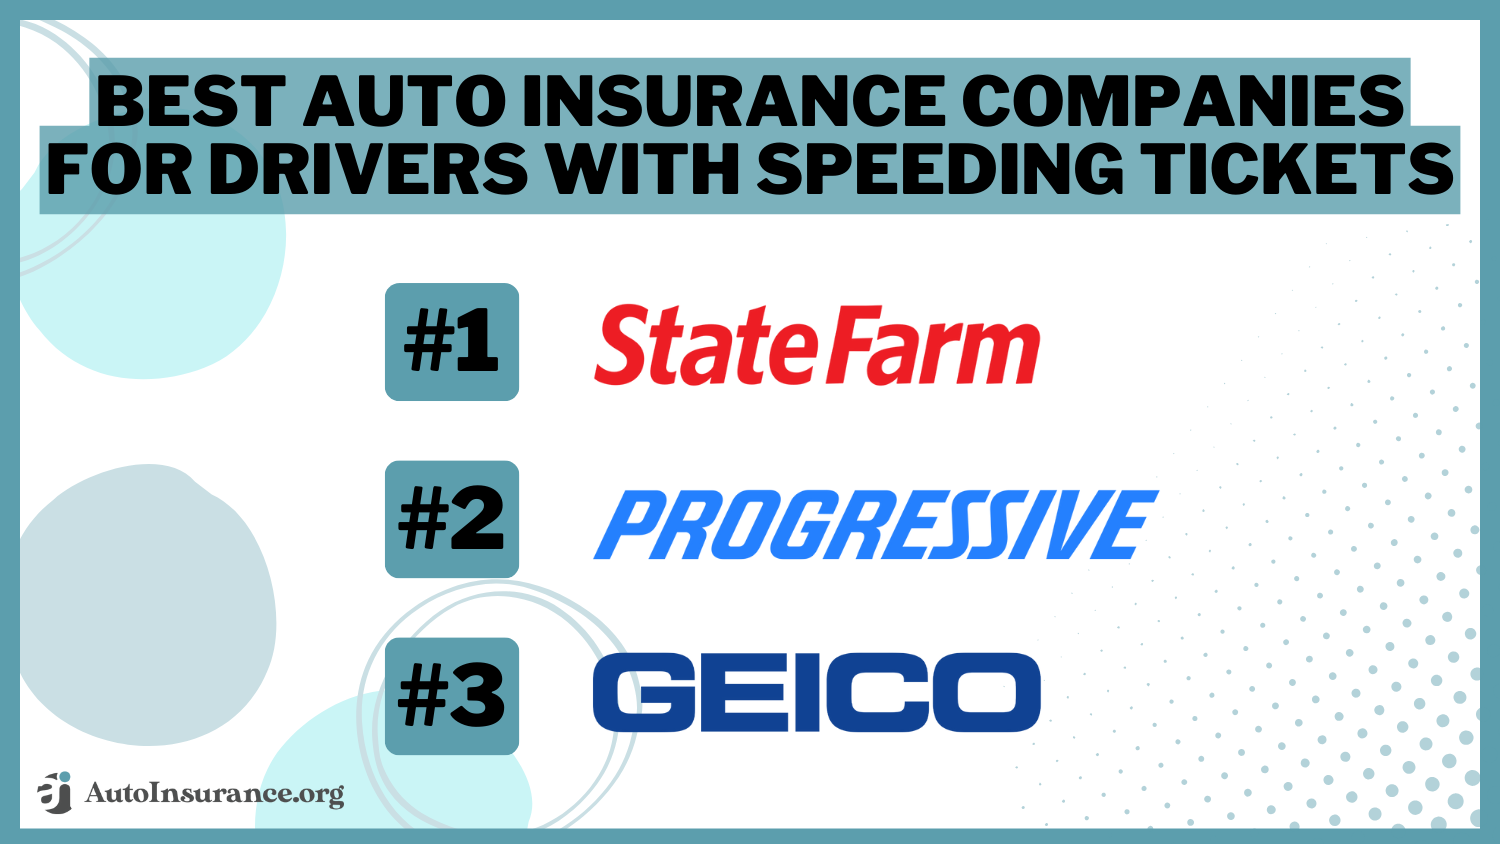 Best Auto Insurance Companies for Drivers With Speeding Tickets: State Farm, Progressive, Geico